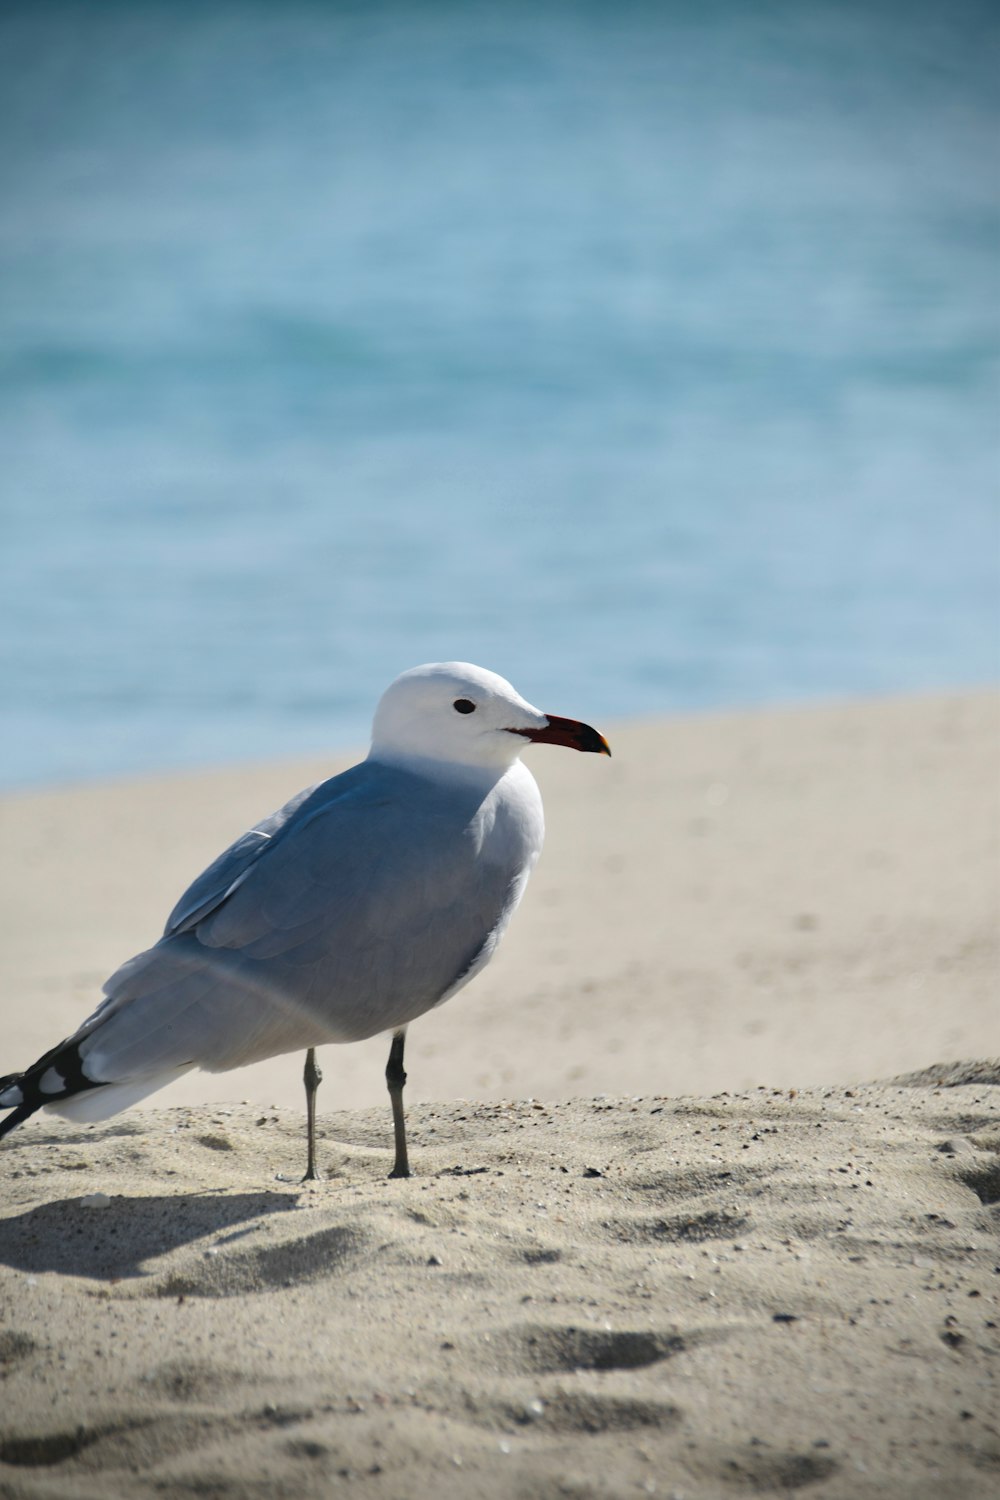 a seagull standing on the sand of a beach